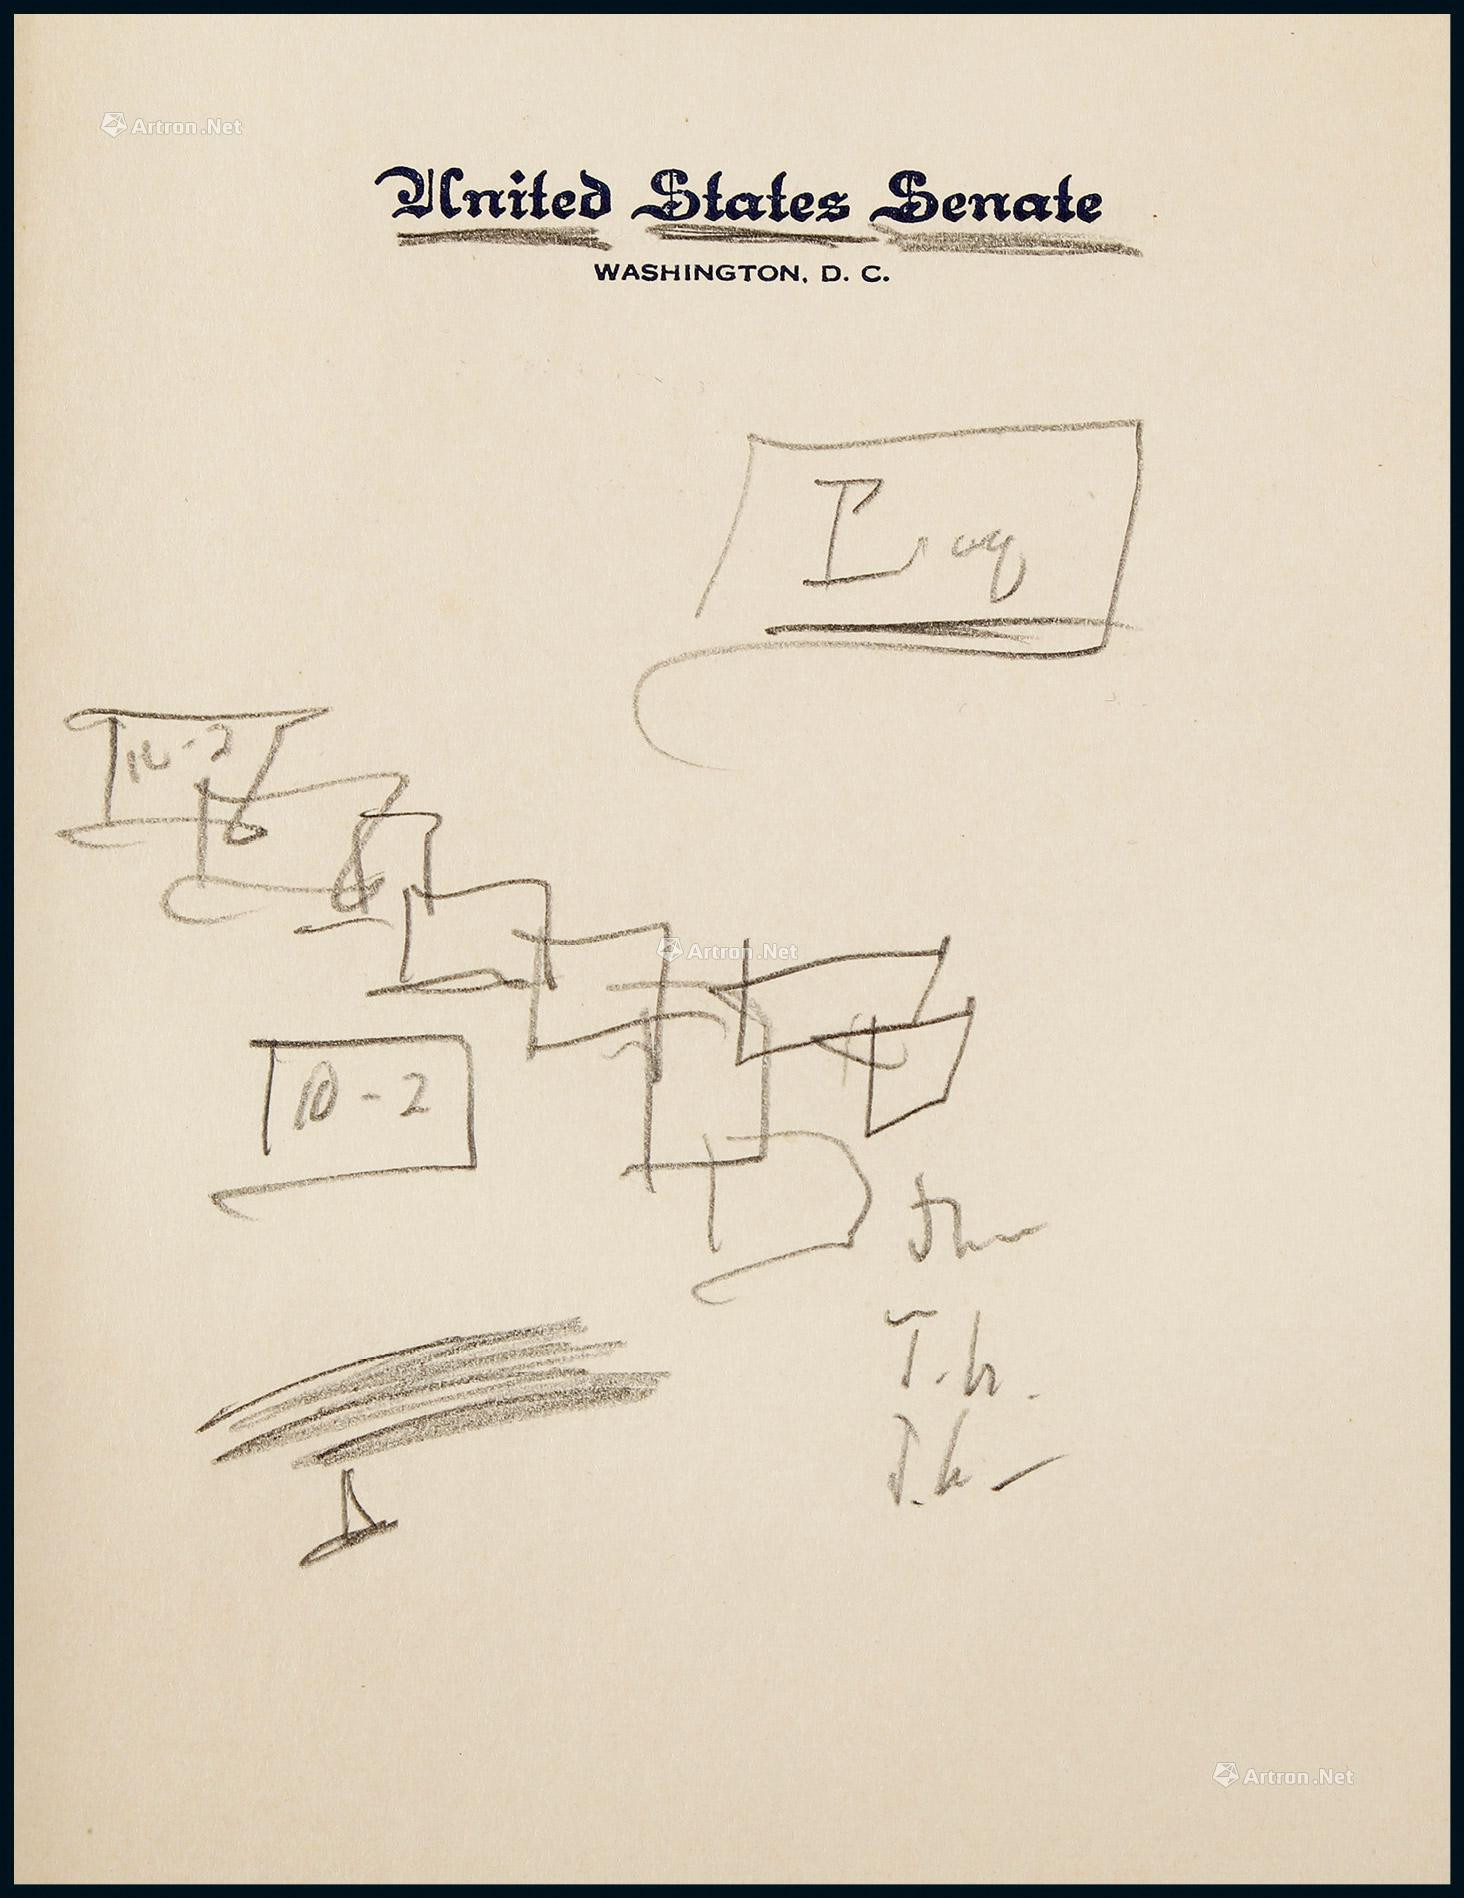 Sketch by the 35th President of the United States John Fitzgerald Kennedy, with COA